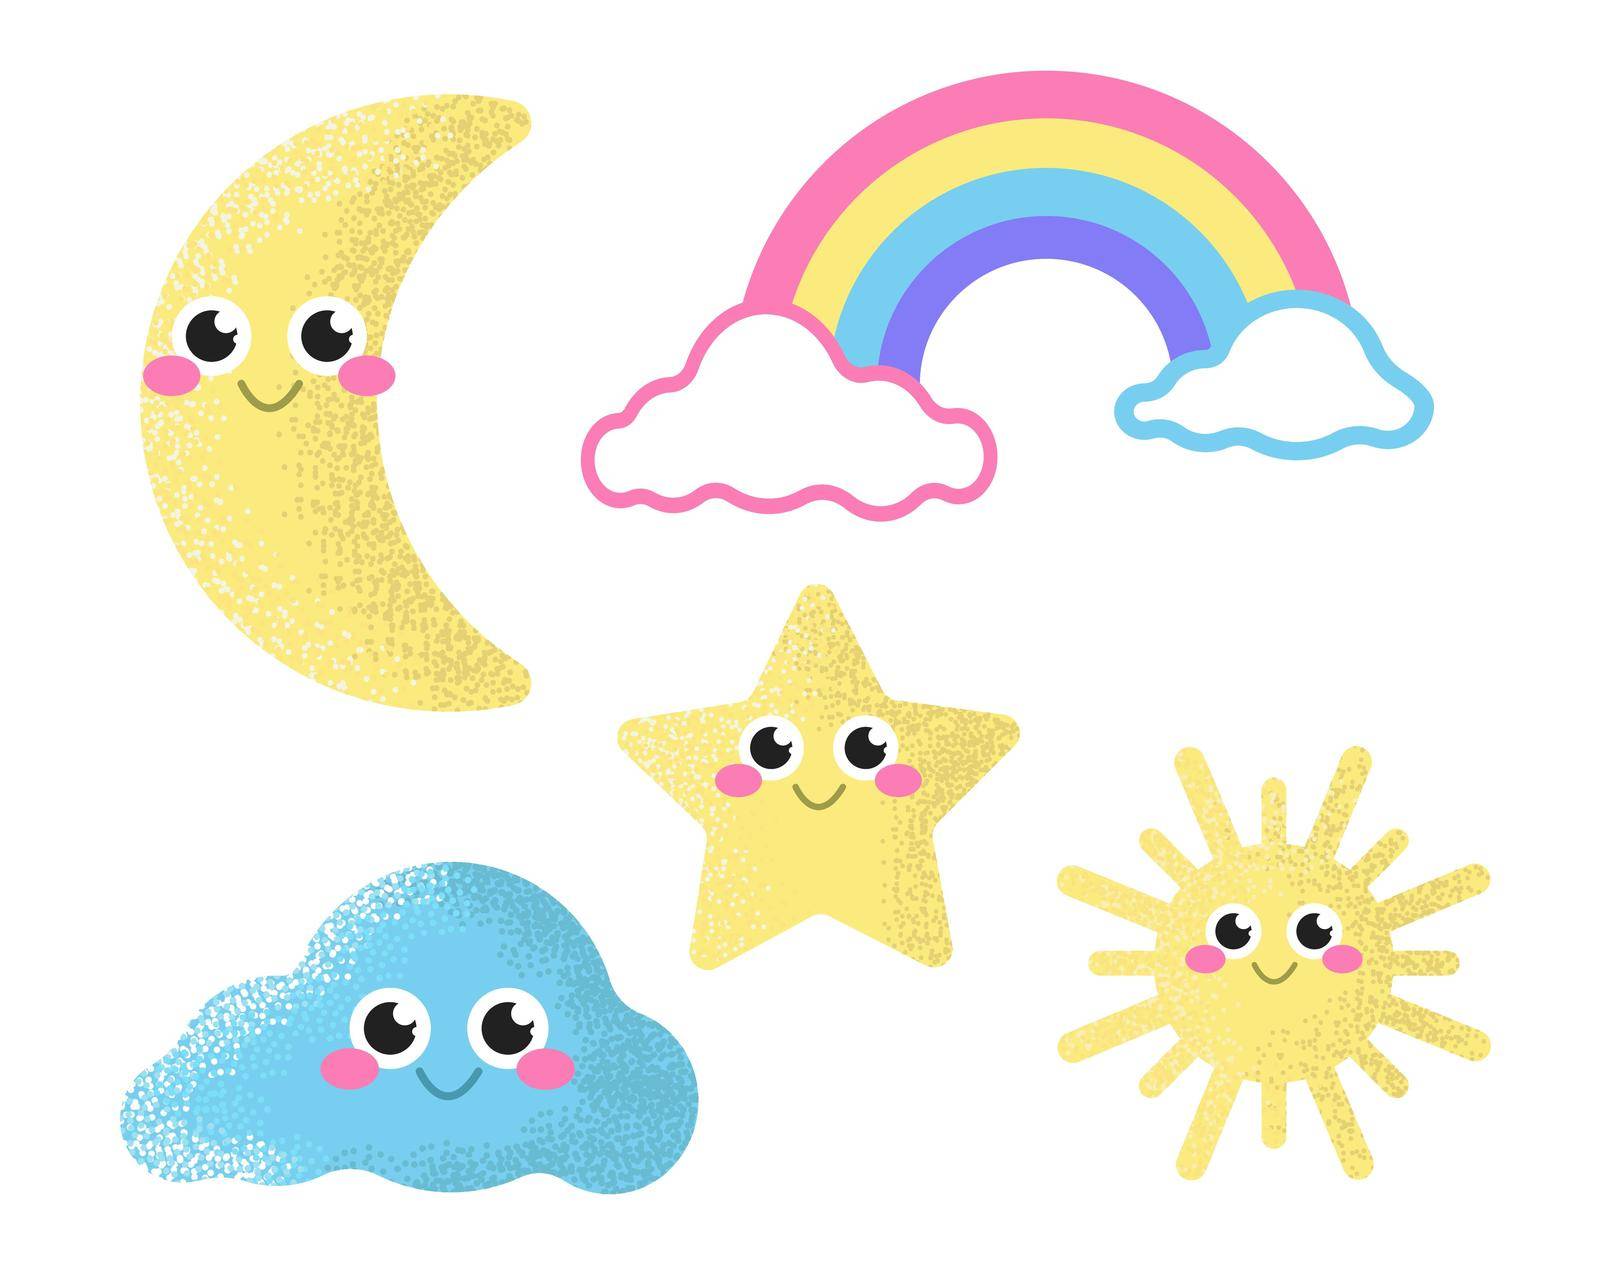 Set of cute icons star, moon, rainbow, cloud and sun. Soft pastel colors, decor for the nursery. Vector flat illustration on a white background by vetriciya_art